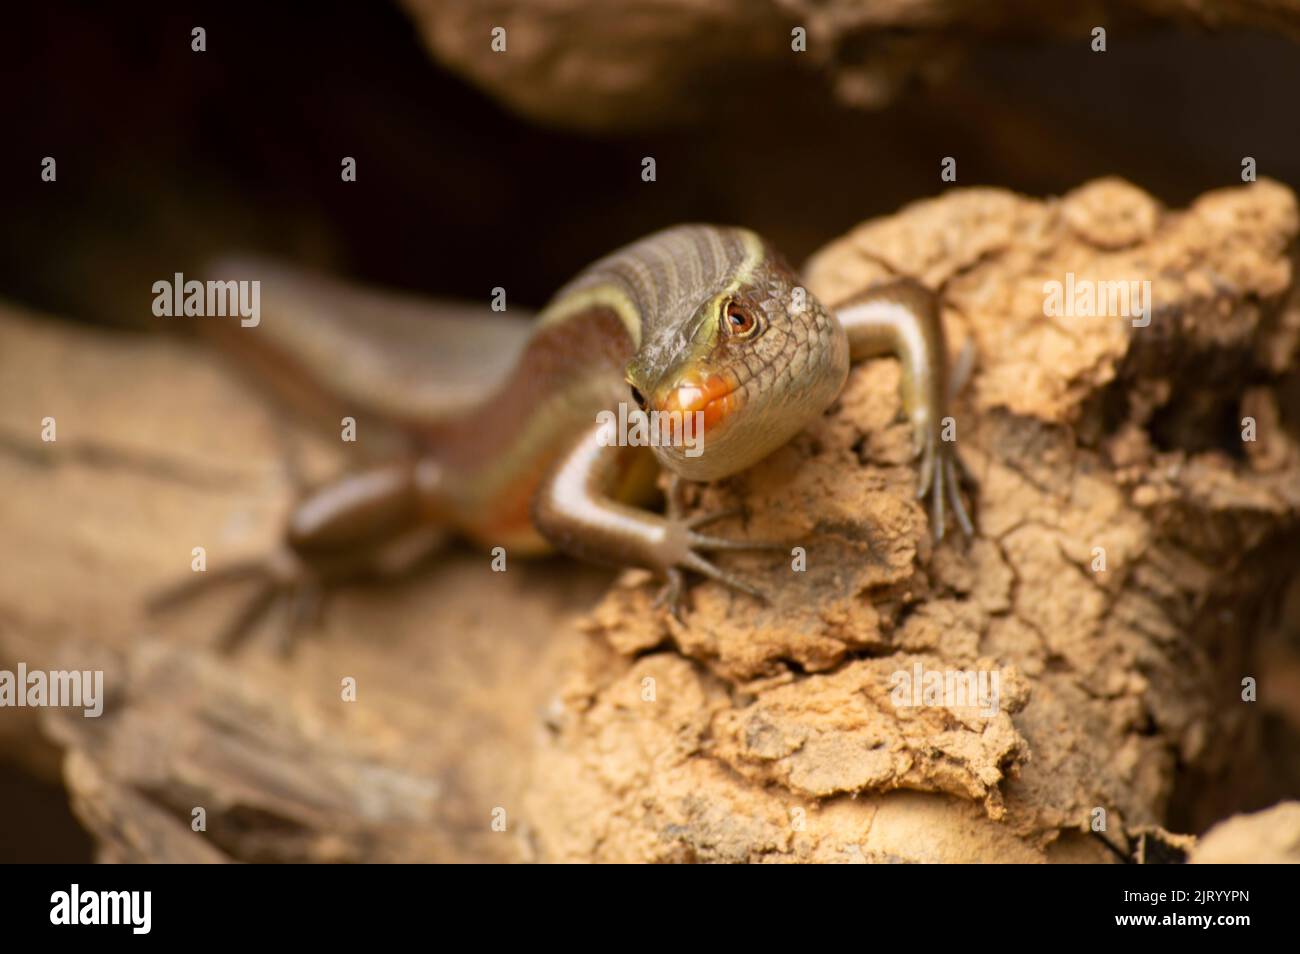 Lizards are a widespread group of reptiles which are cold blooded animals. Here is a lizard on with forming a beautiful background. Stock Photo